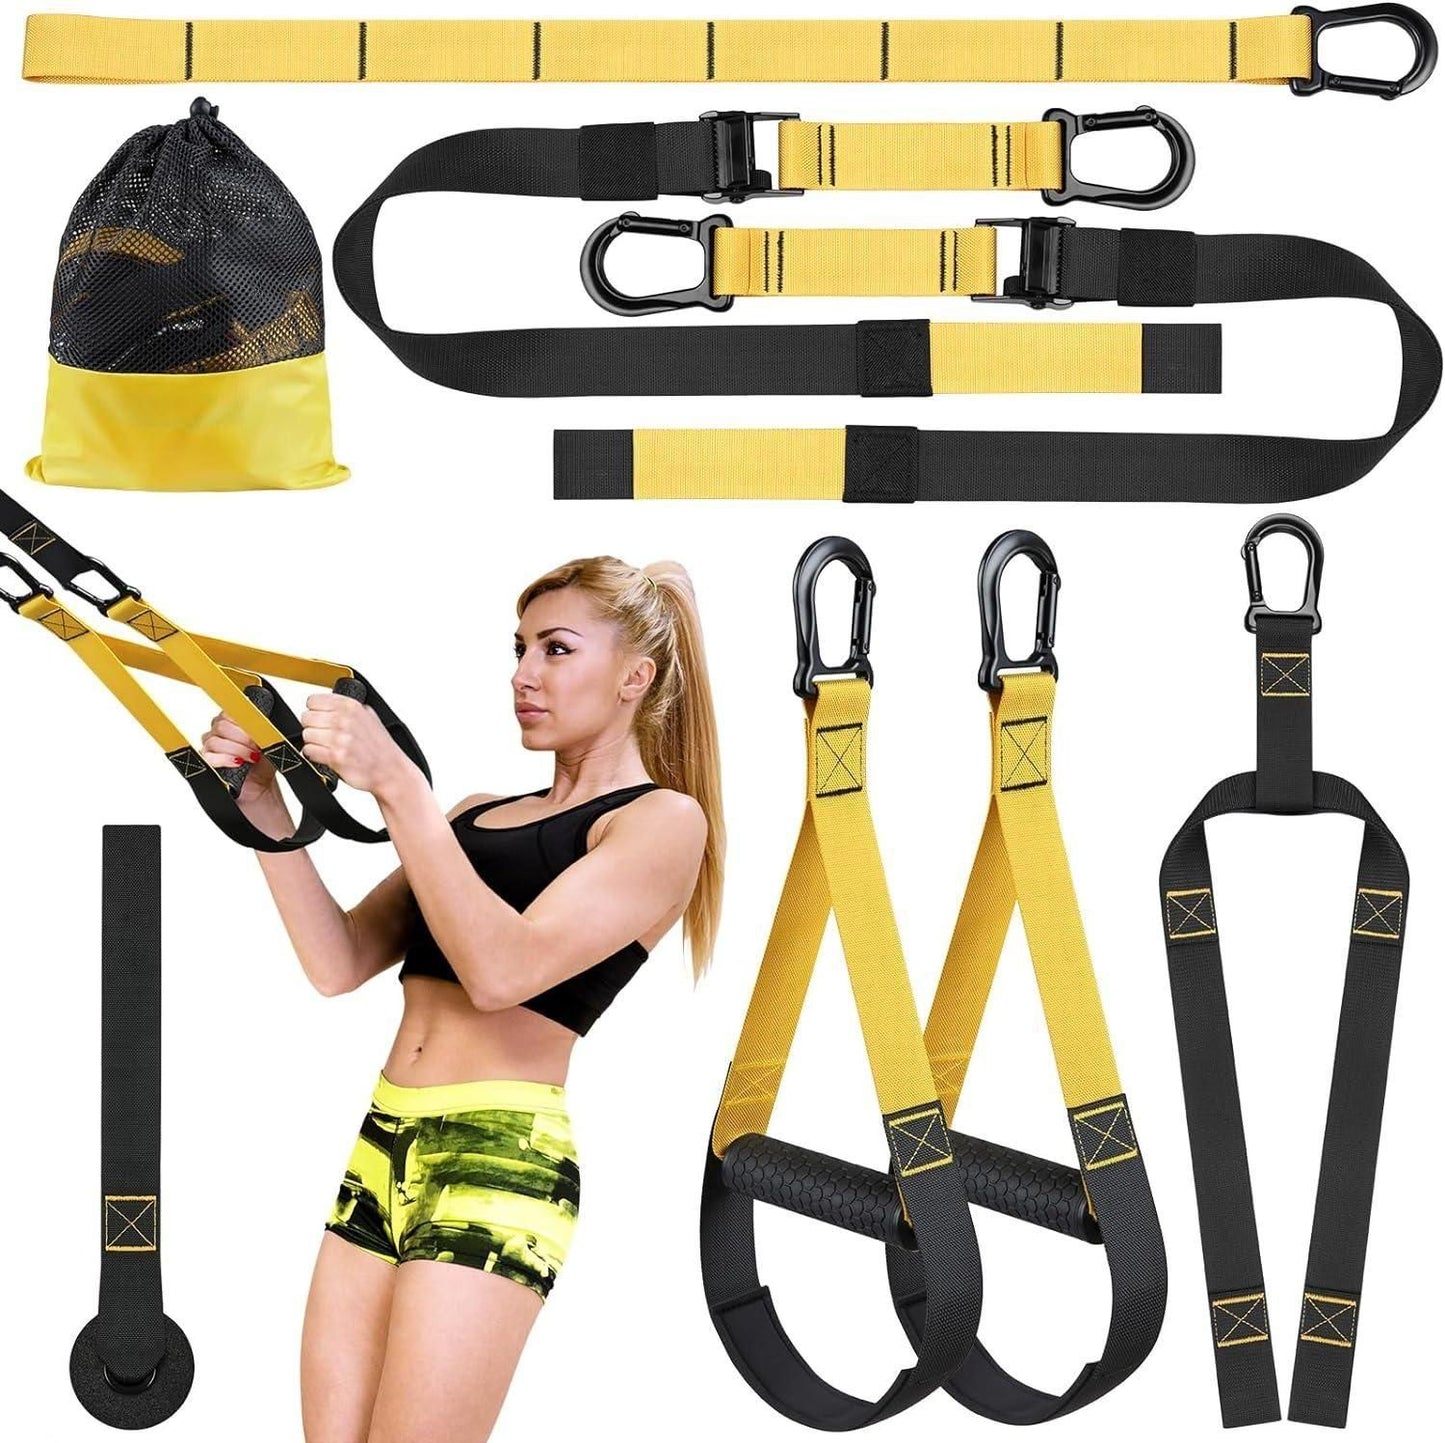 Resistance Training Kit (Exercise Bands with Handles)